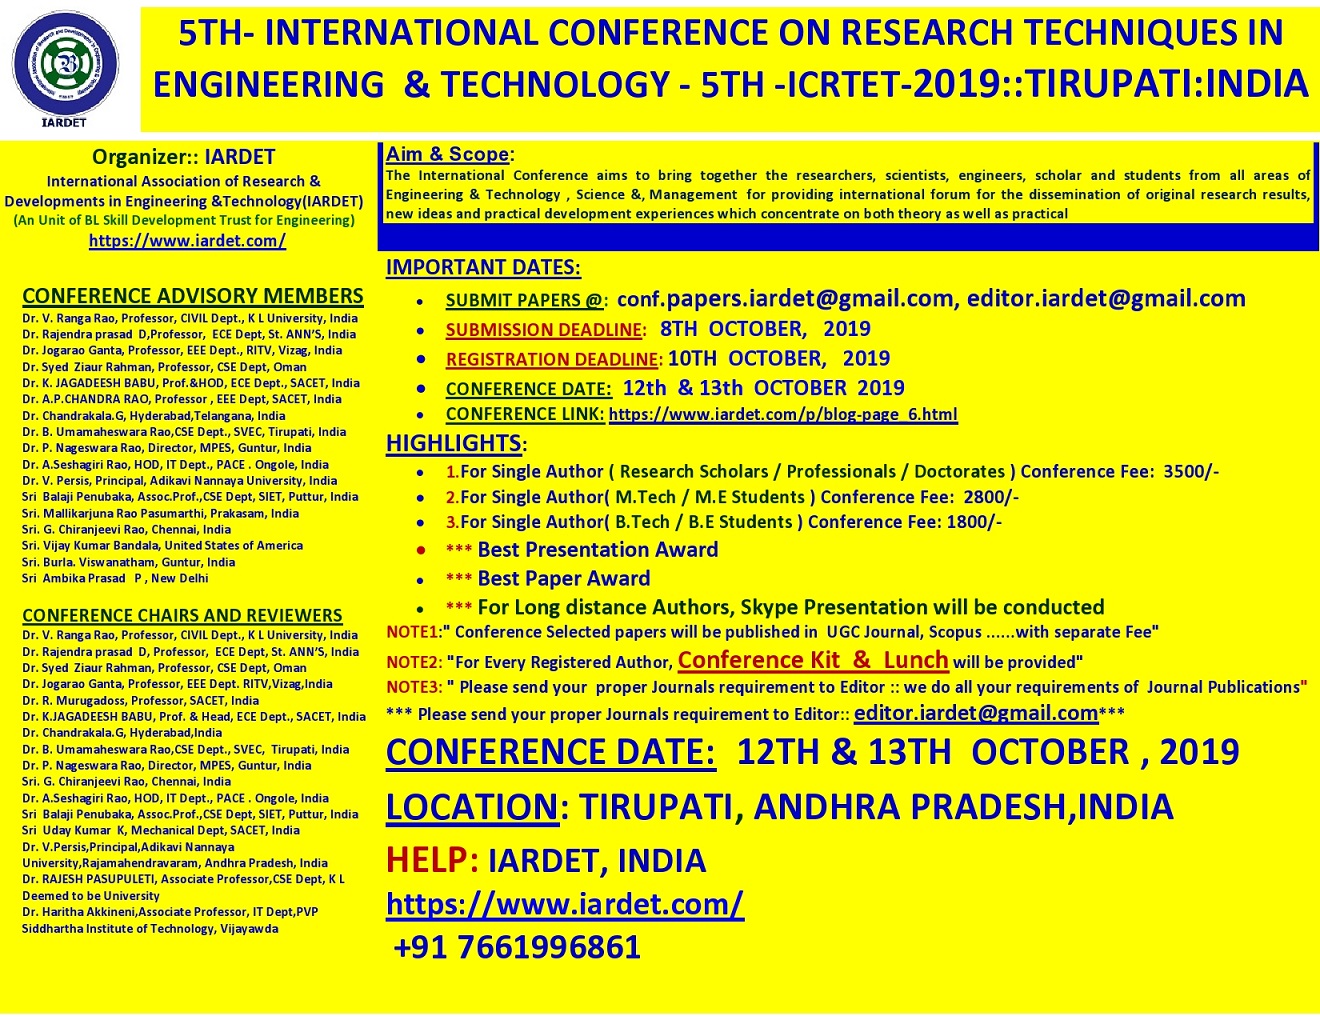 5th International Conference on Research Techniques in Engineering and Technology ICRTET 2019